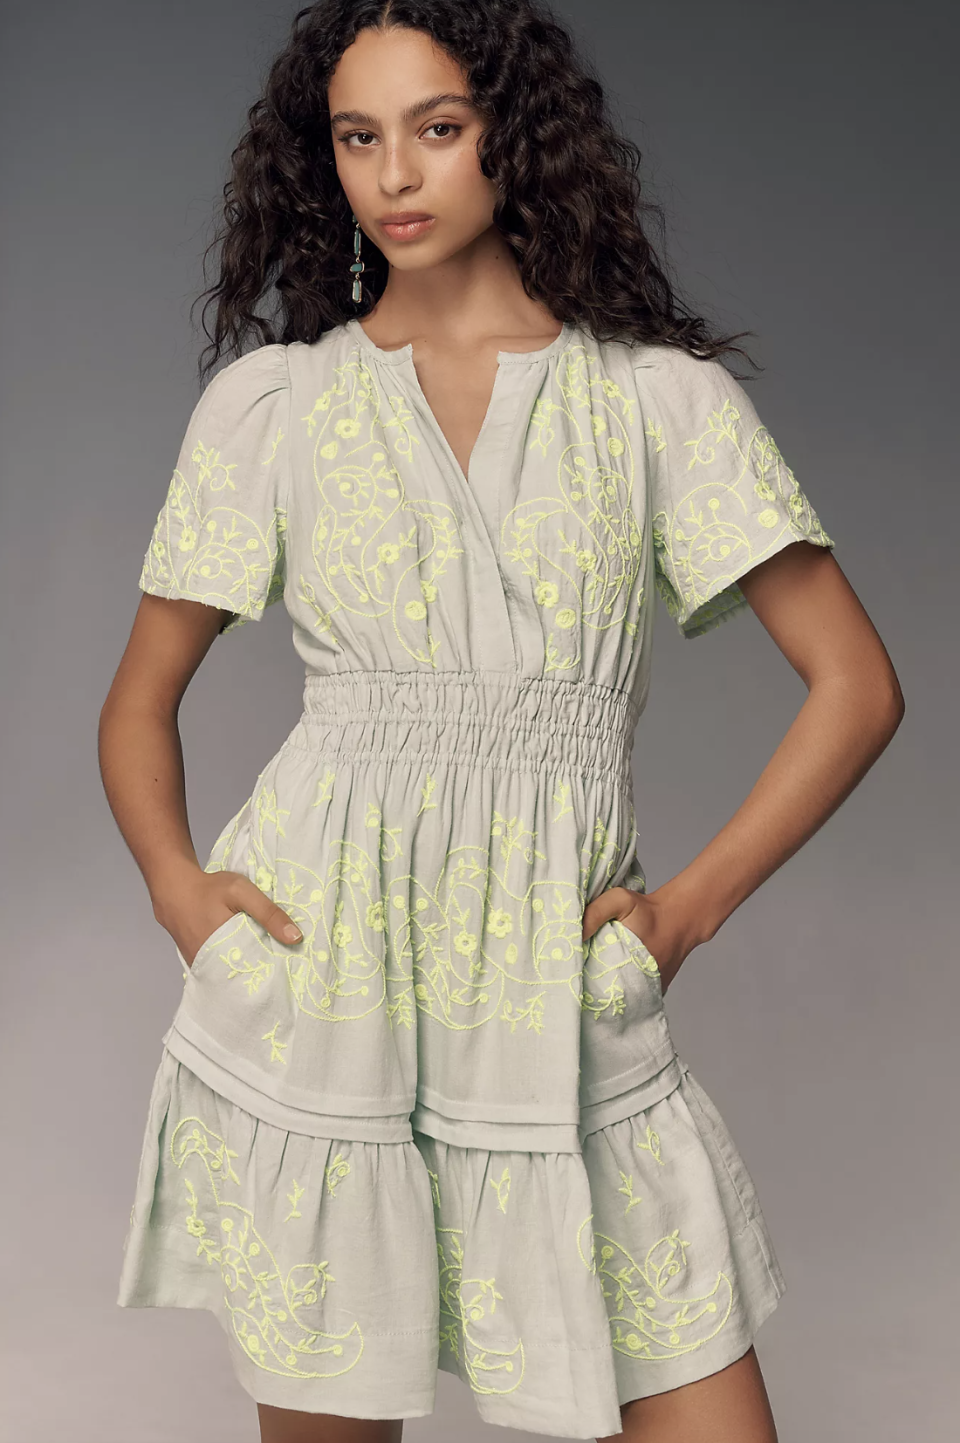 The Somerset Mini Dress: Embroidered Linen Edition (Photo via Anthropologie)